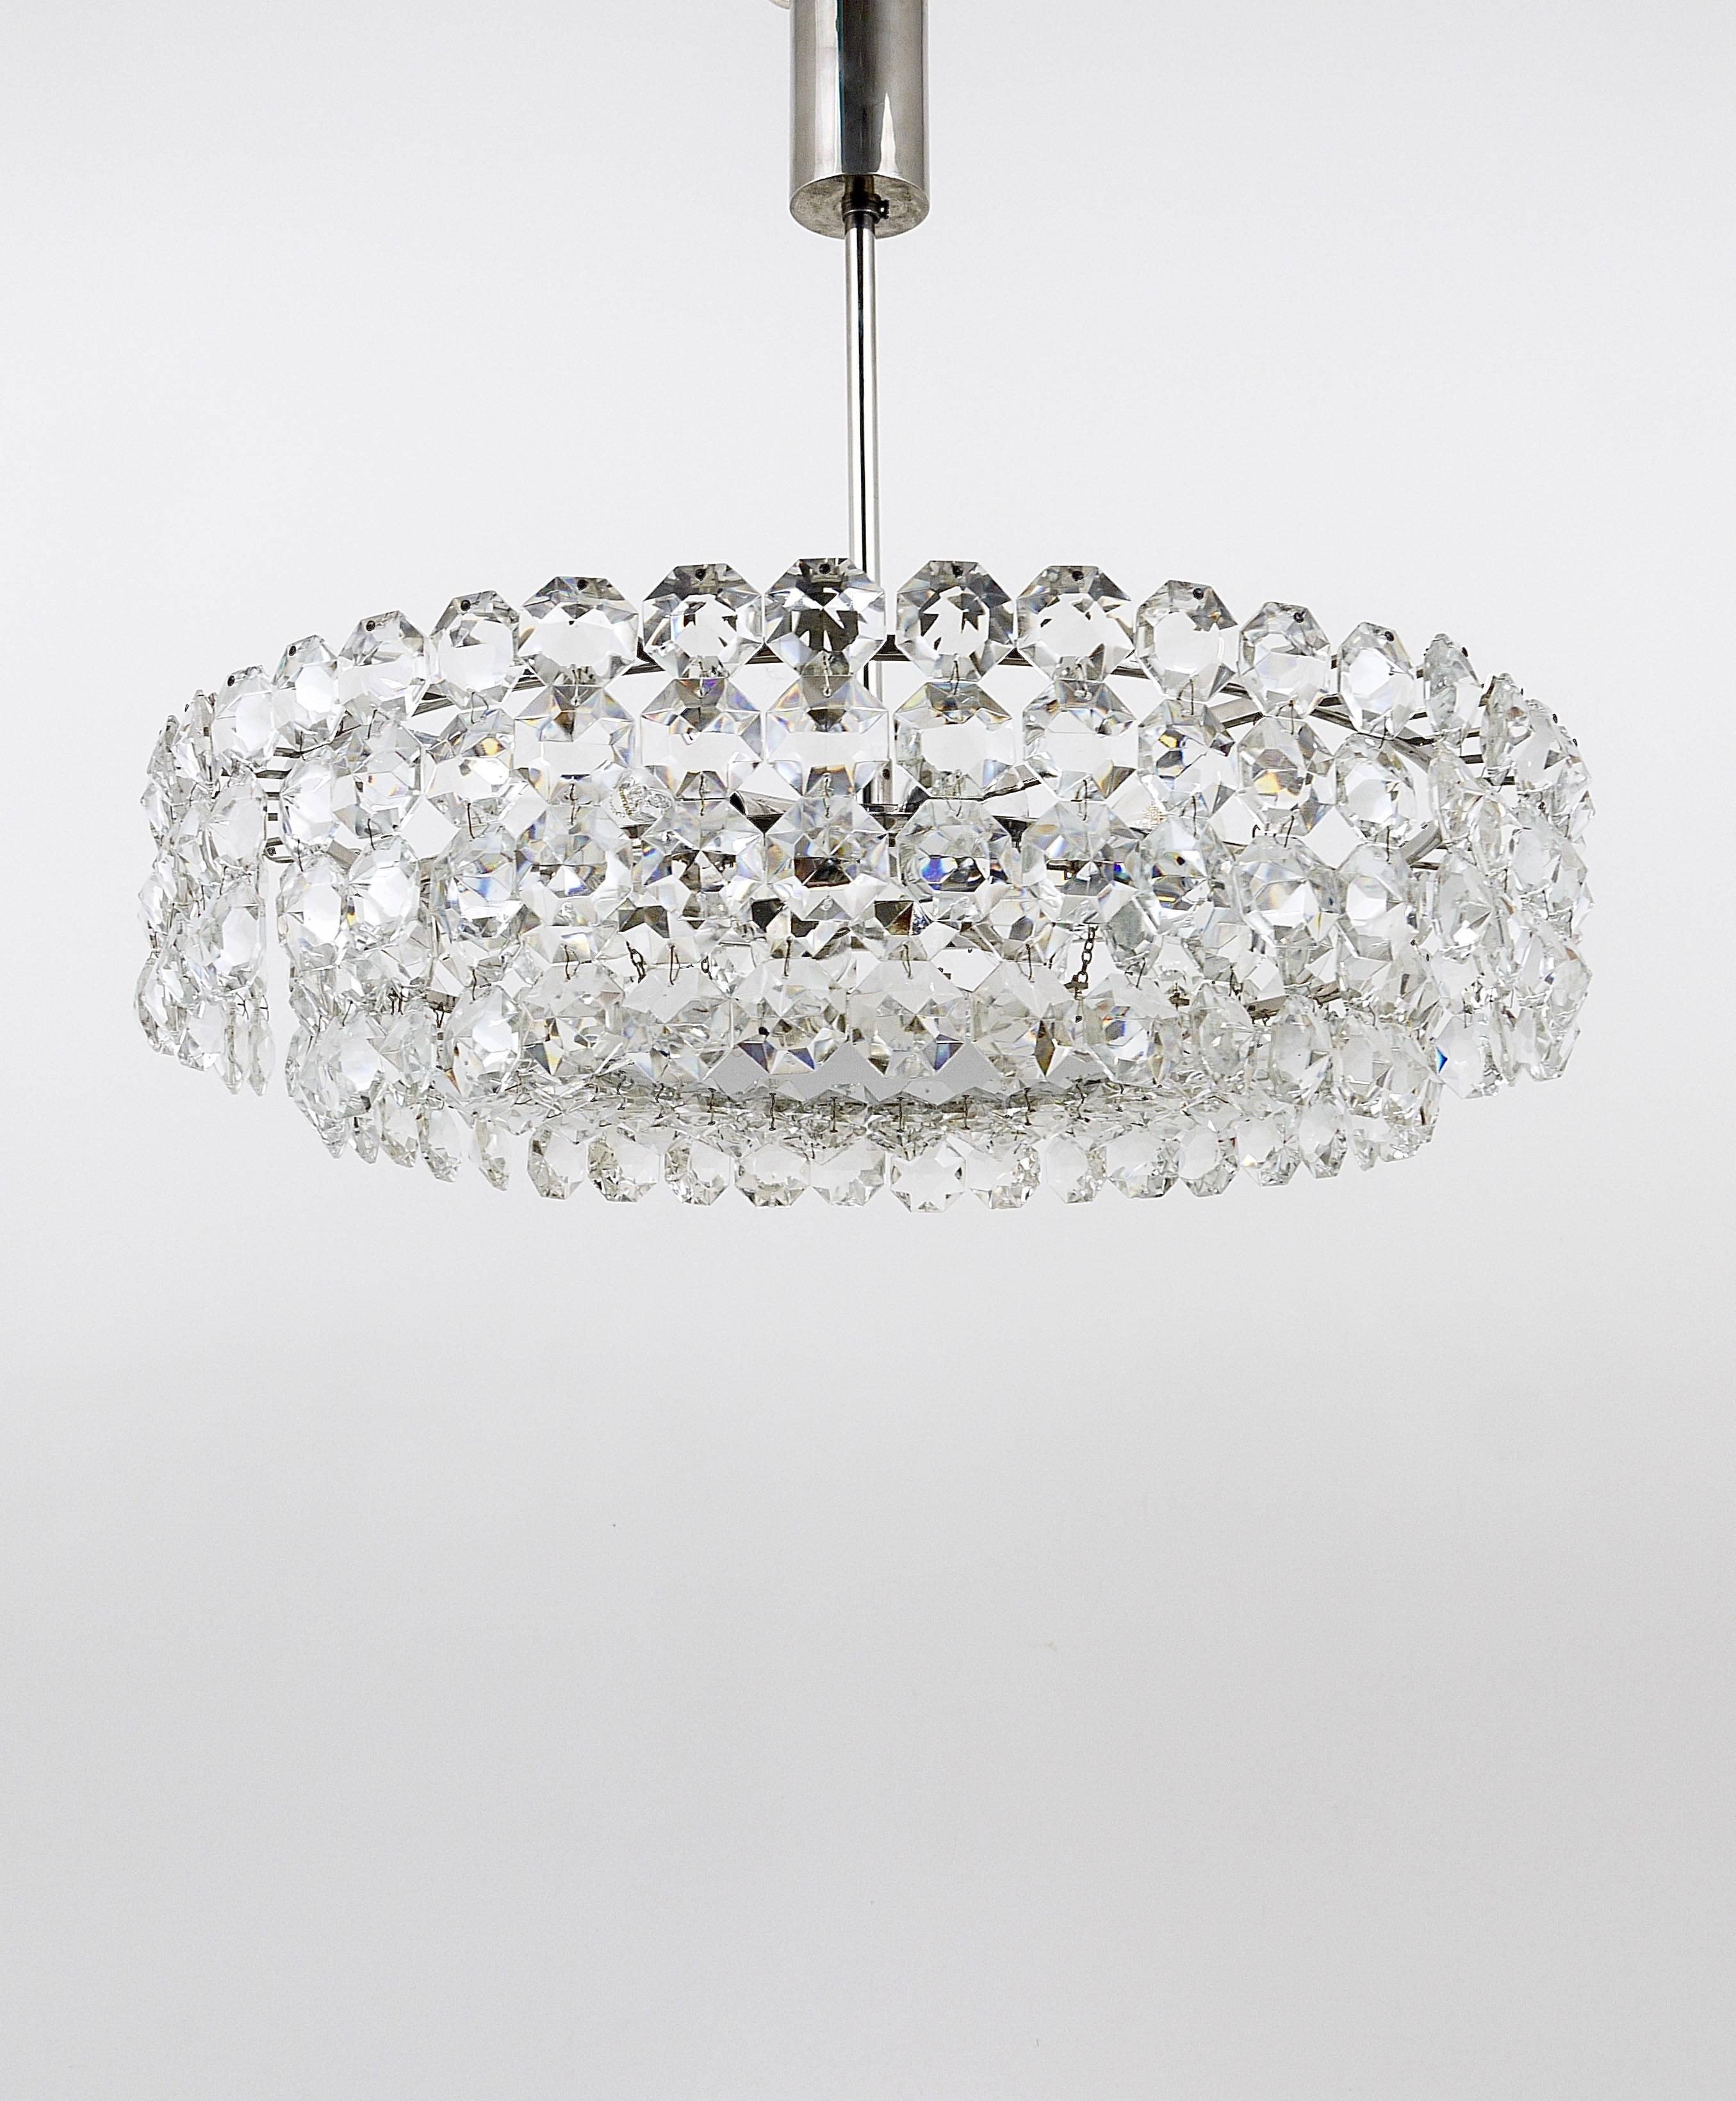 Faceted Large Bakalowits Nickel Chandelier with Diamond-Shaped Crystals, Austria, 1960s For Sale